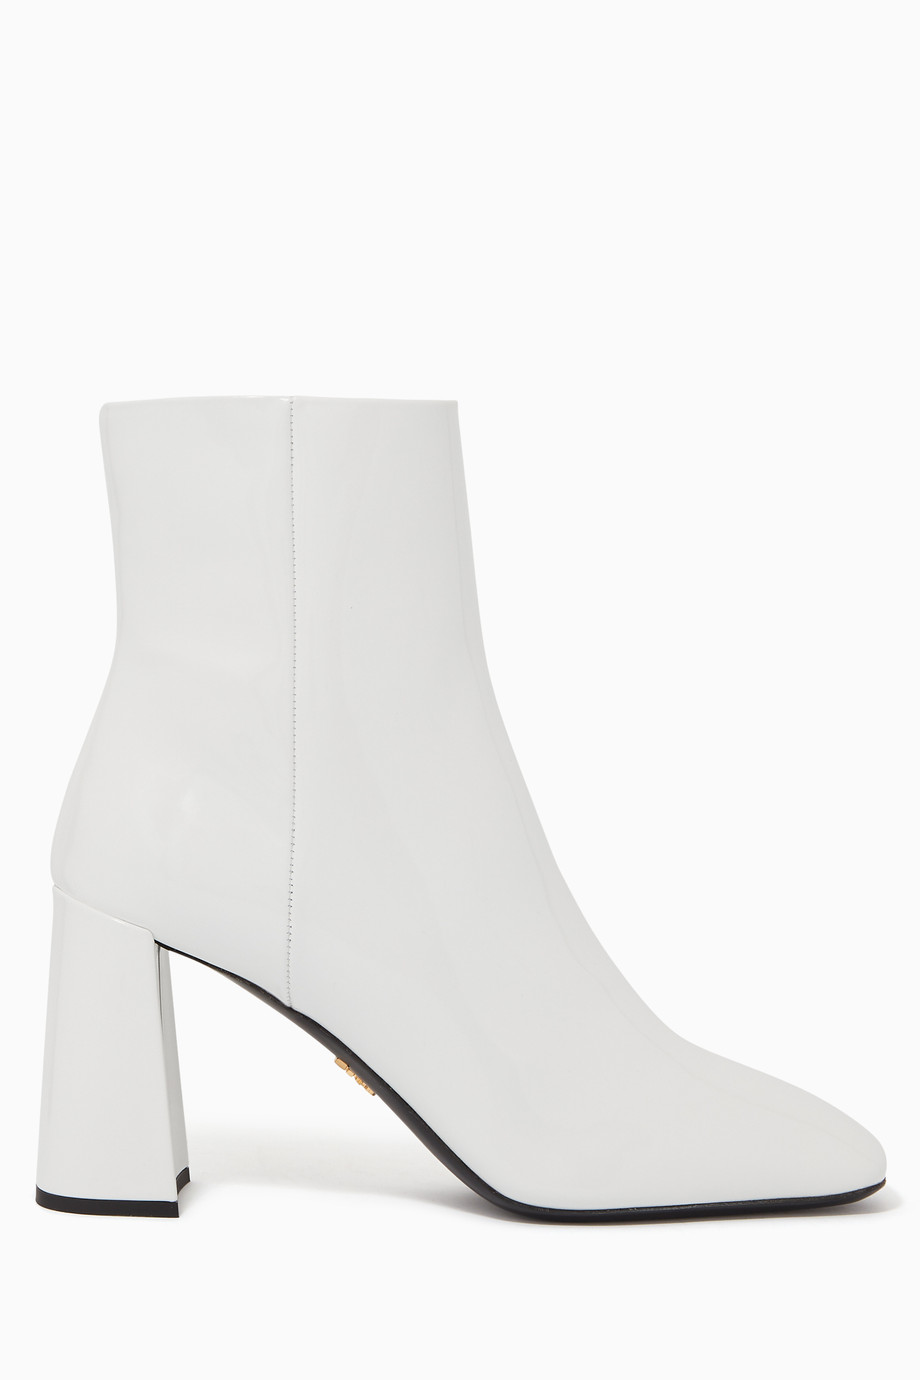 Shop Prada White Chunky Heel Patent Leather Boots for Women | Ounass UAE